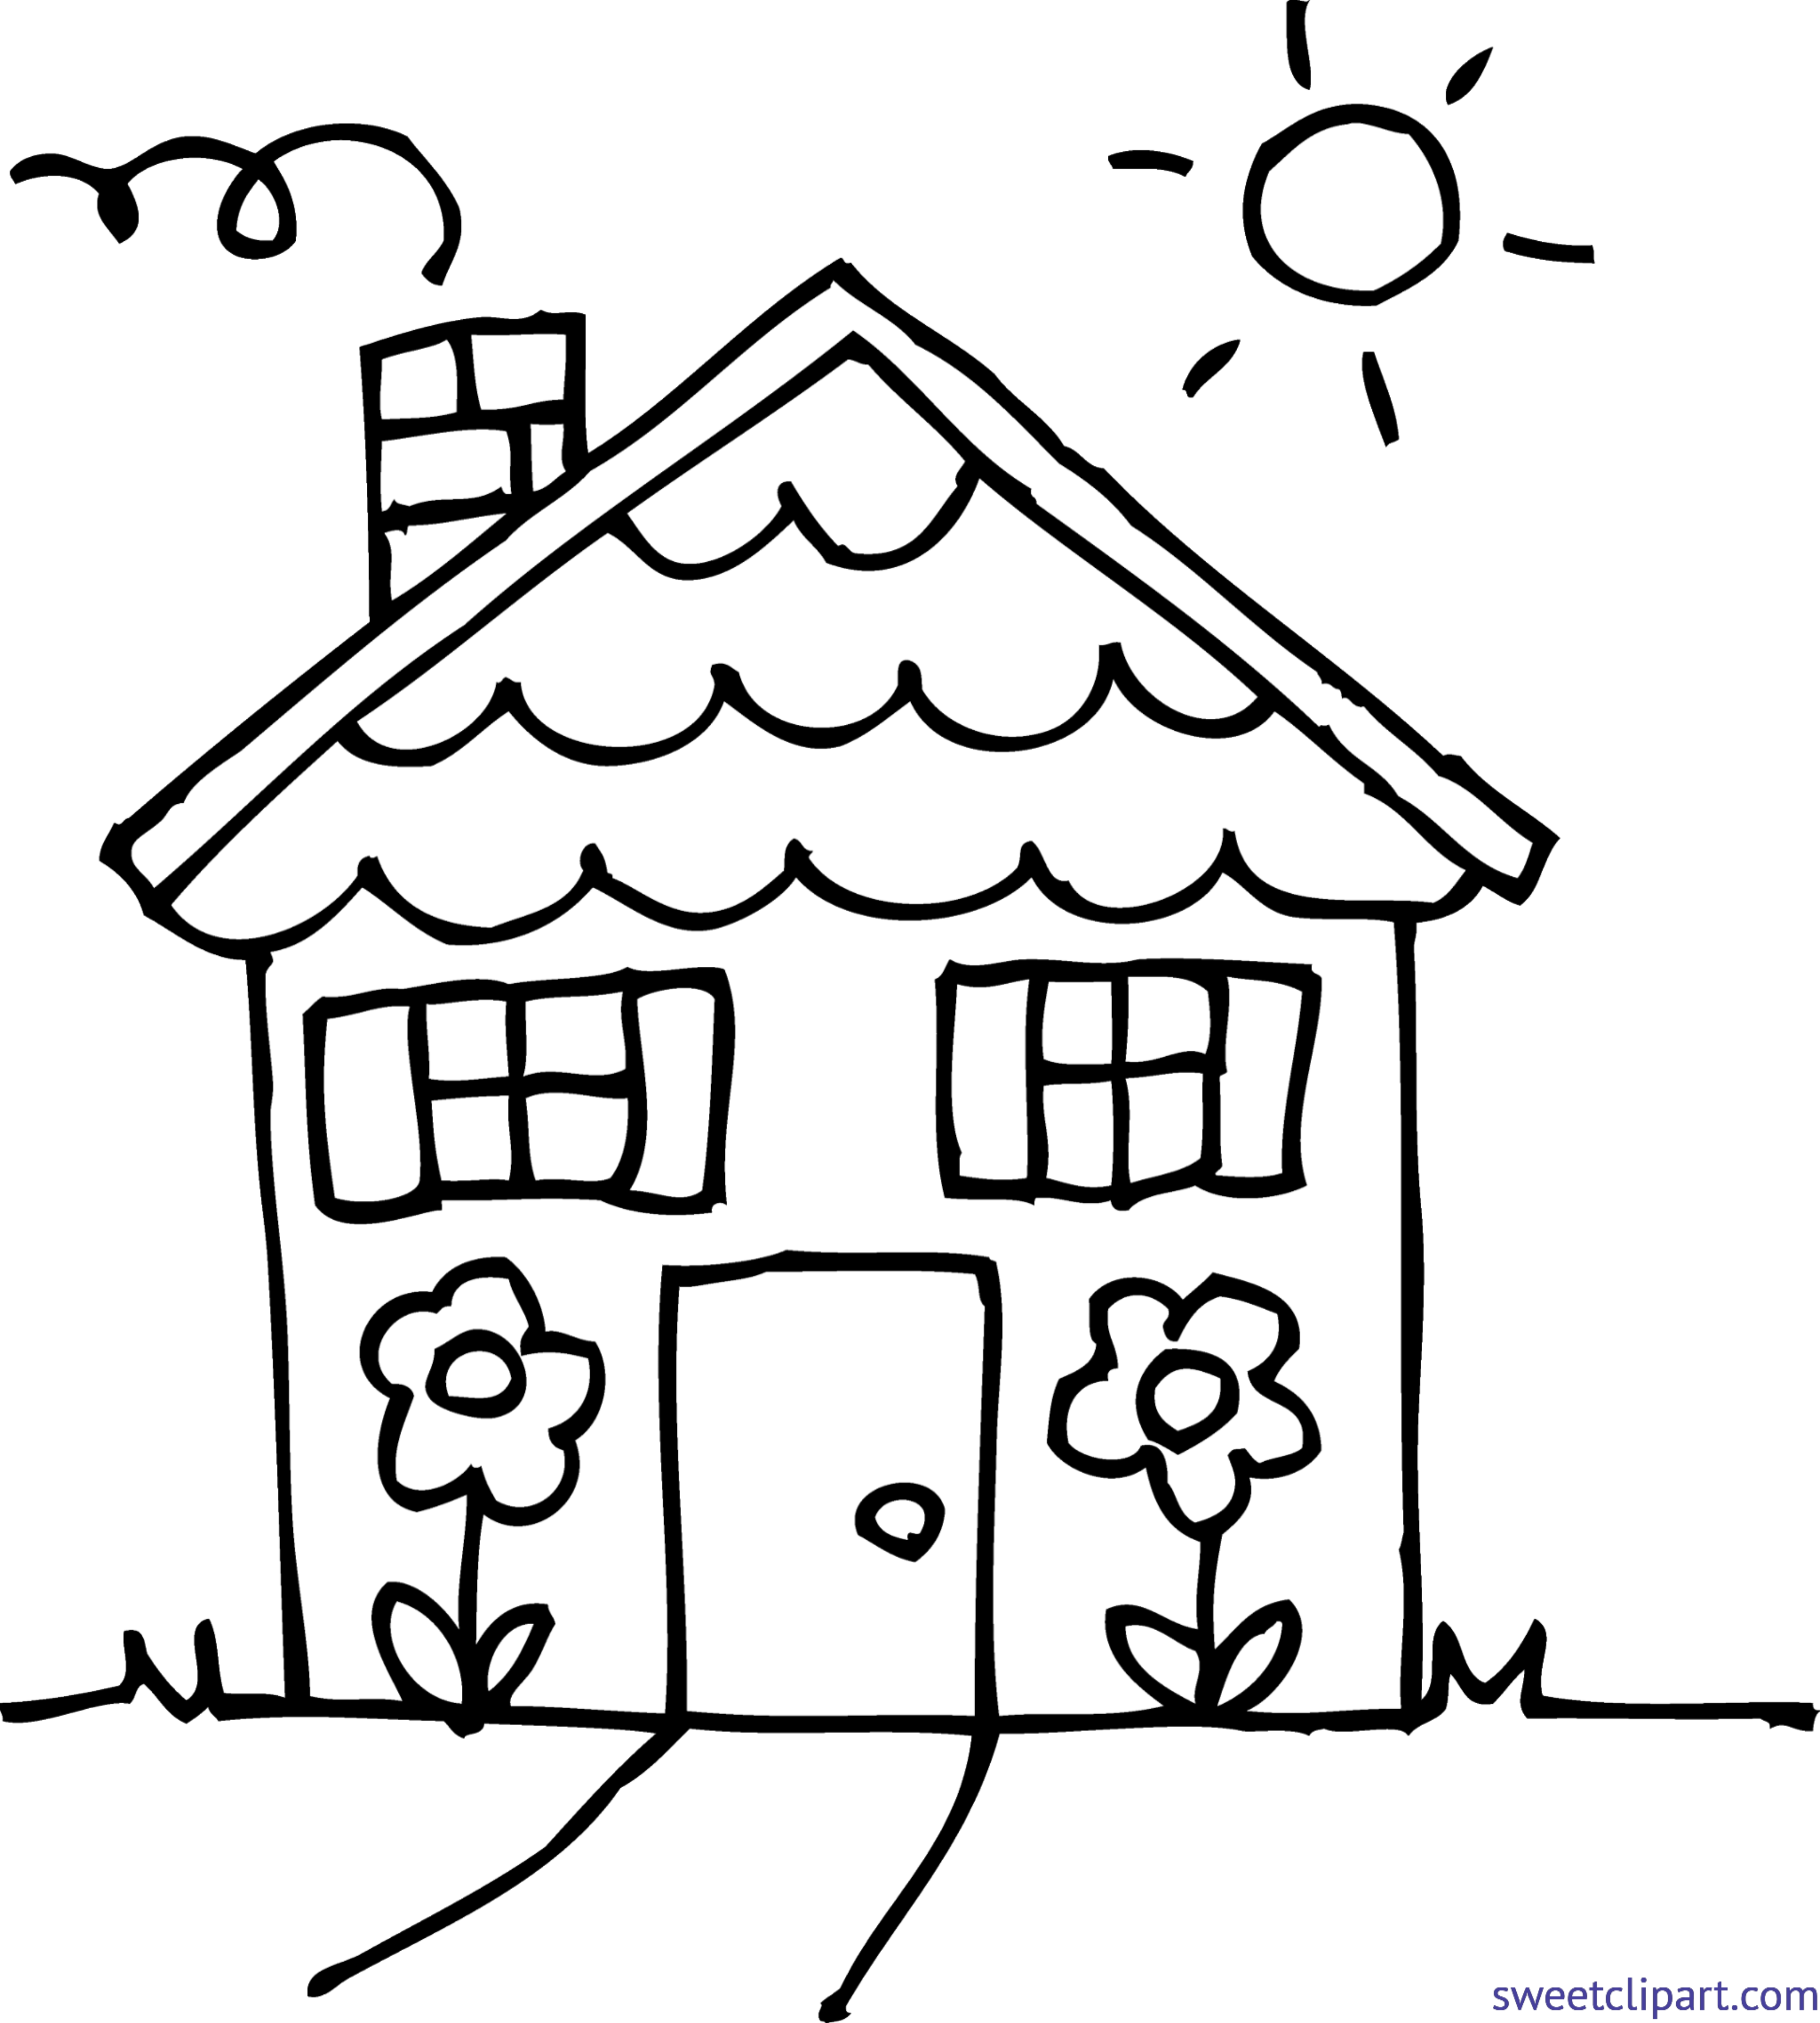 Doghouse clipart house traditional japanese. Line drawing clip art